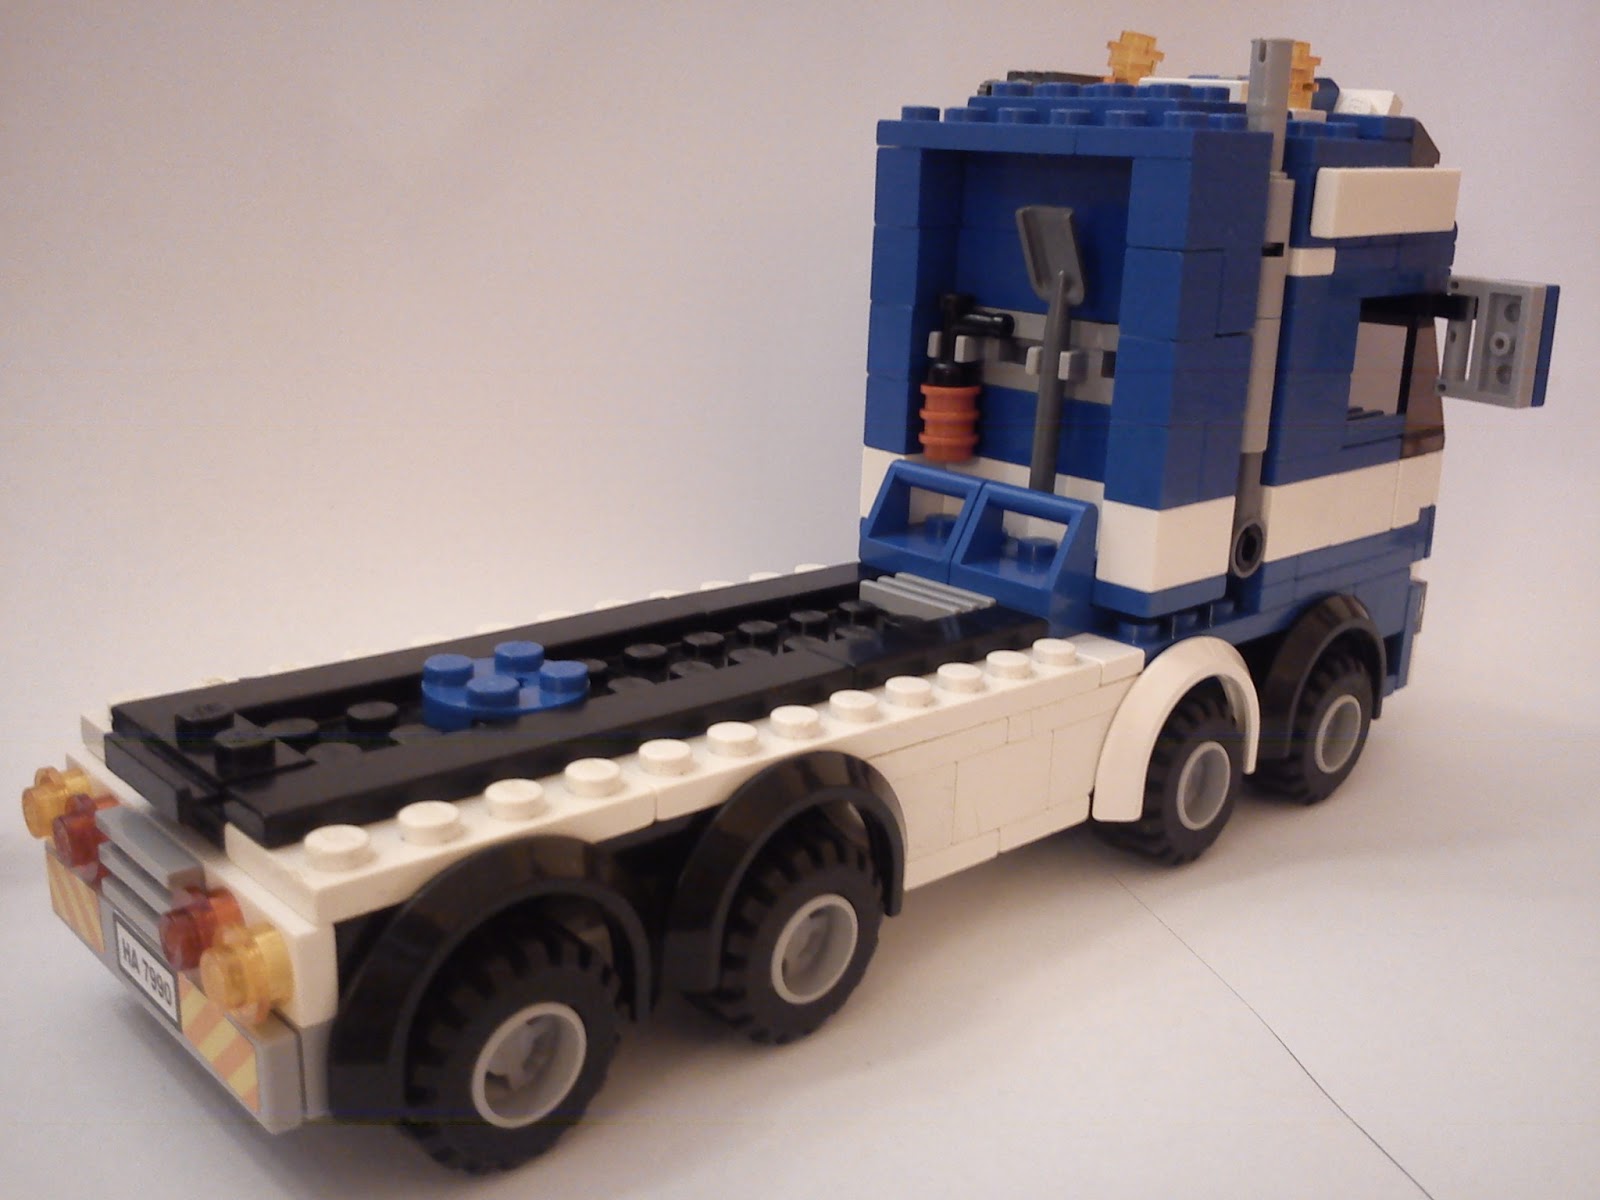 How to build a lego ford pickup truck #6